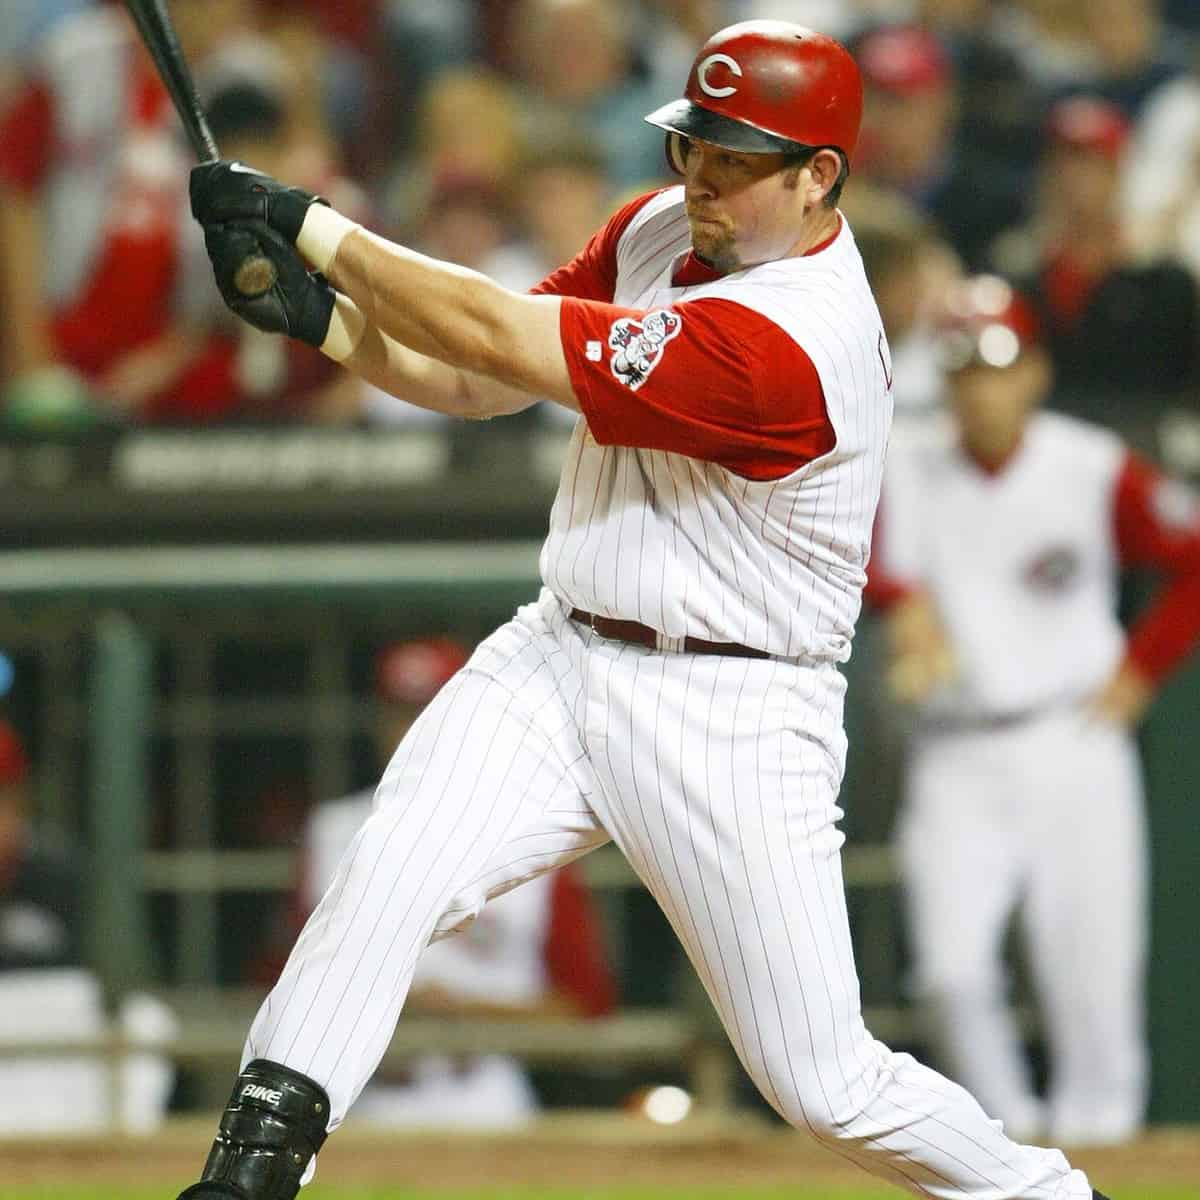 Sean Casey's Numbers Make Him Best Hitting Coach For Yankees